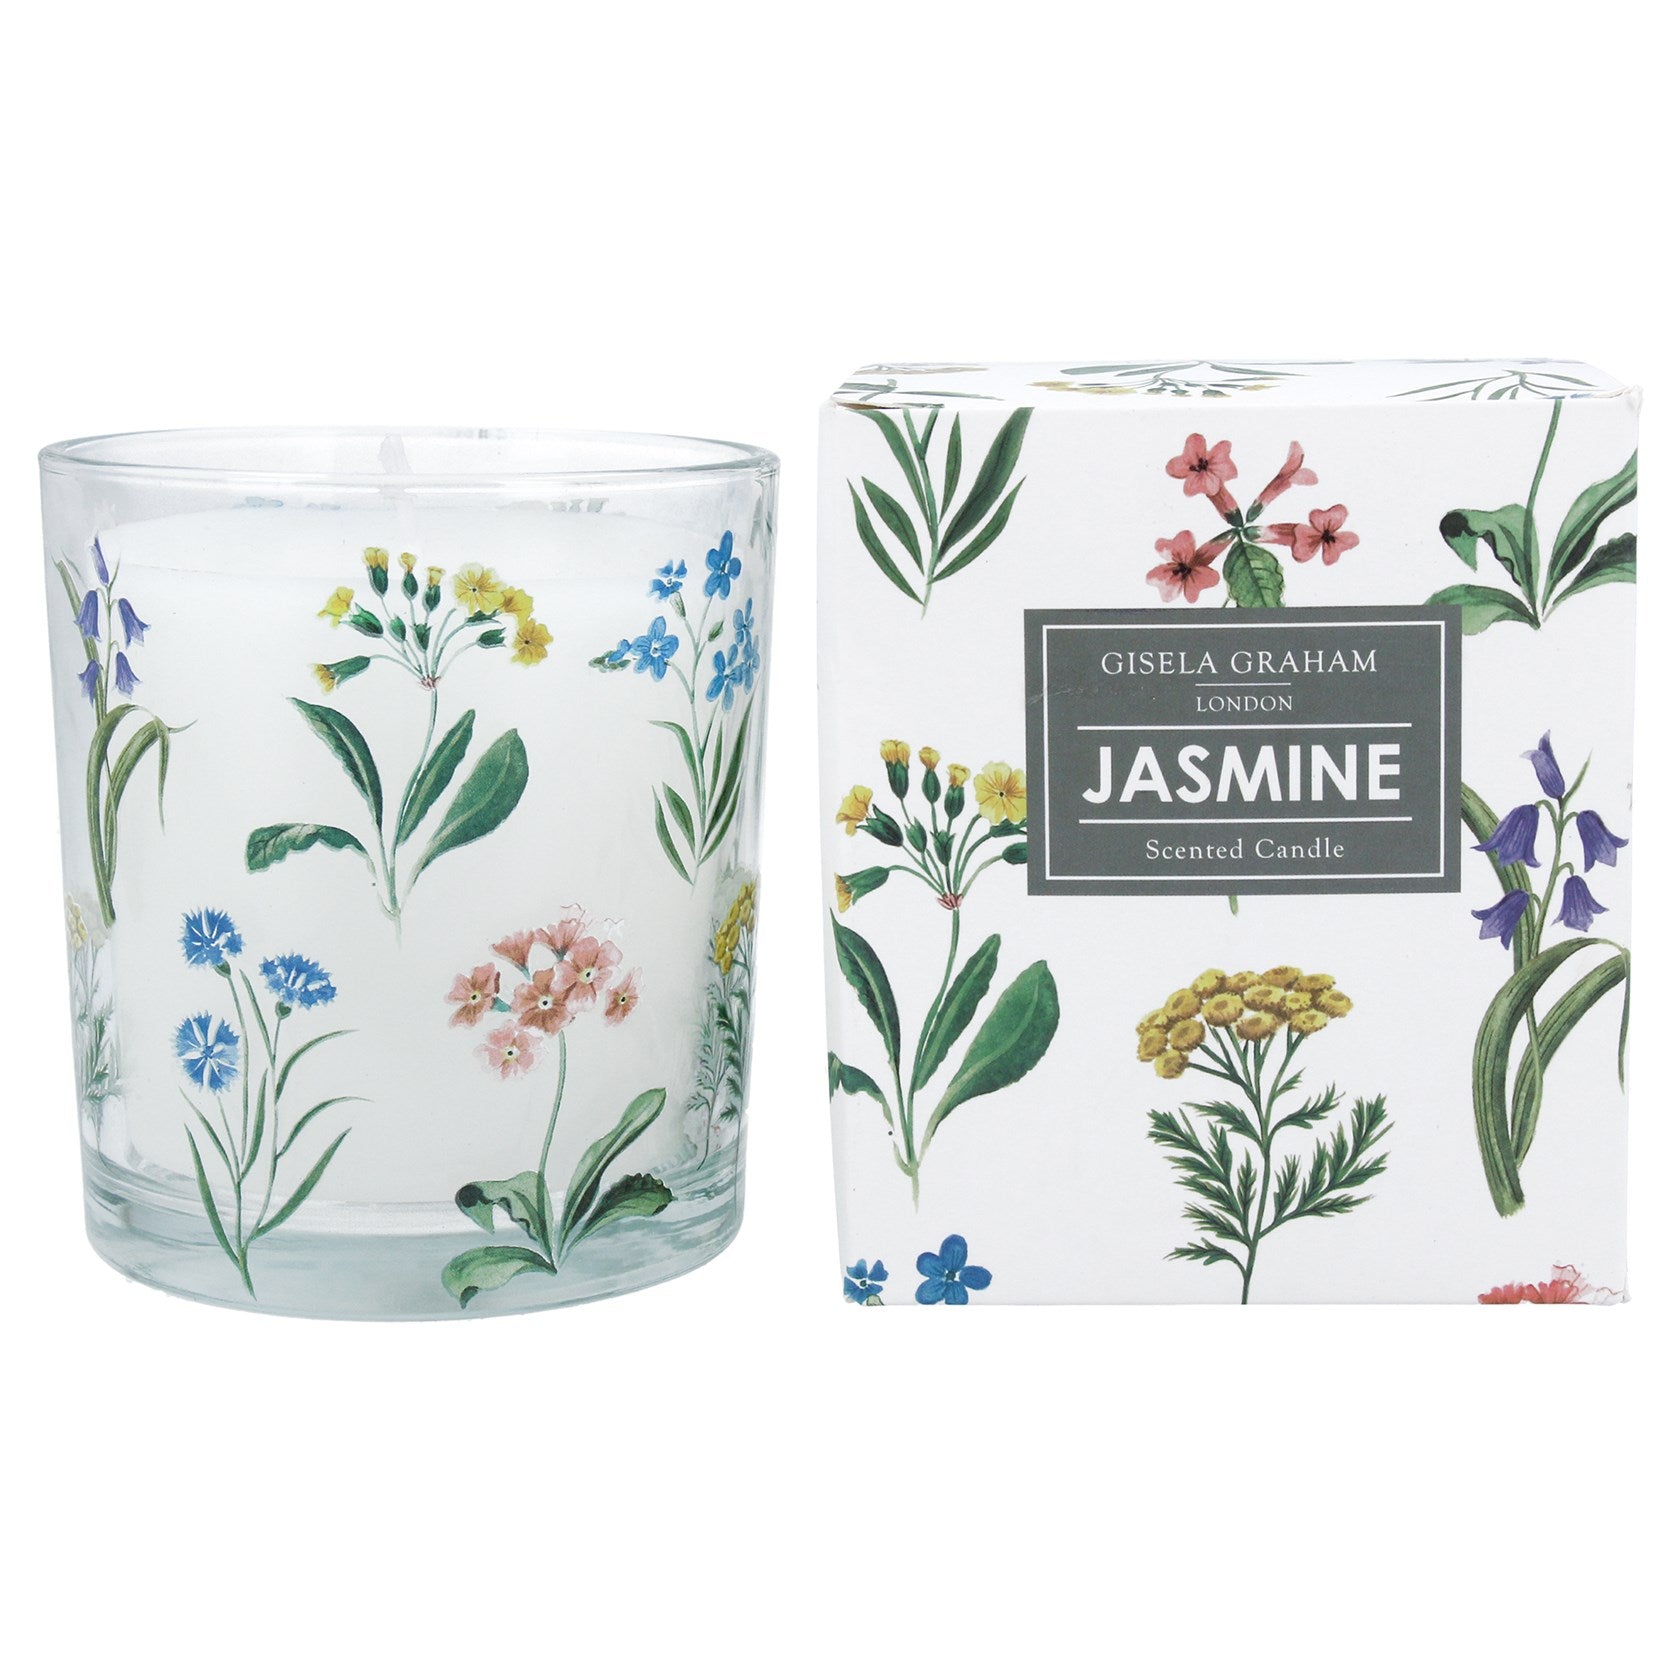 Jasmine scented large candle